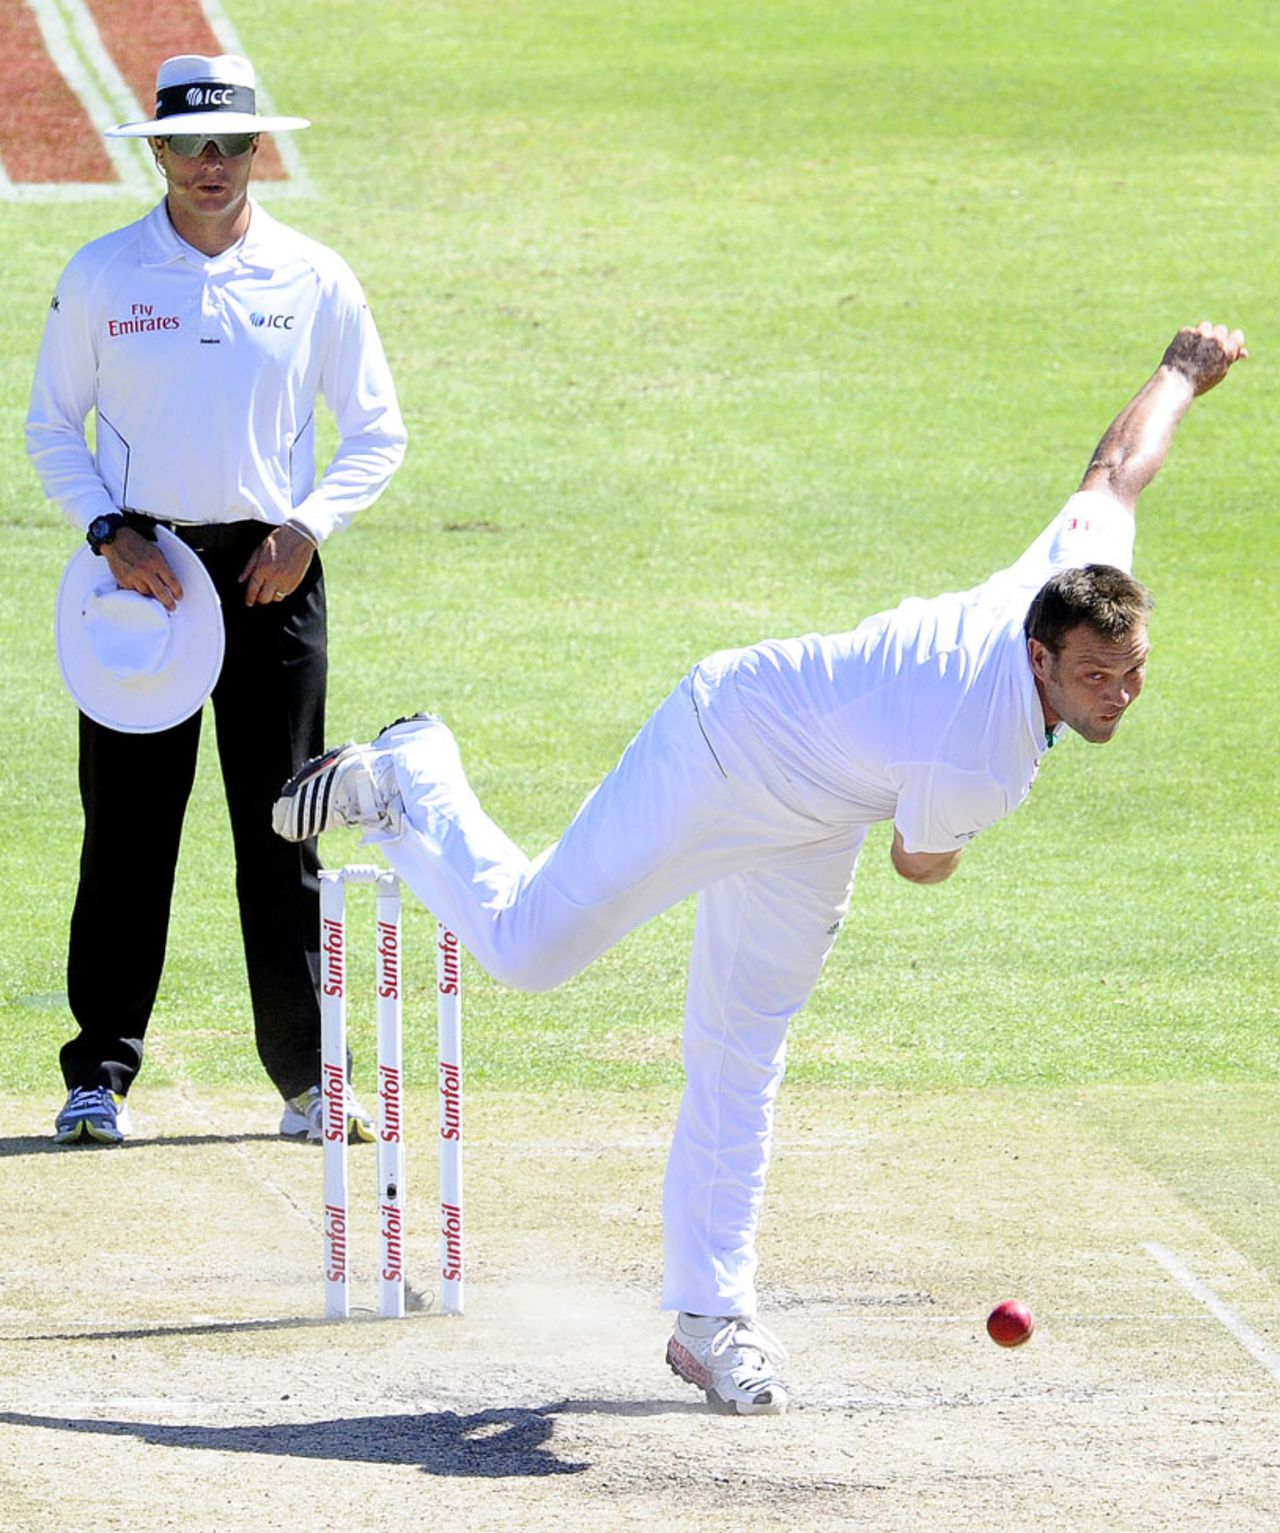 Jacques Kallis' aggressive spell brought the wicket of Lahiru Thirimanne, South Africa v Sri Lanka, 3rd Test, Cape Town, January, 5, 2012